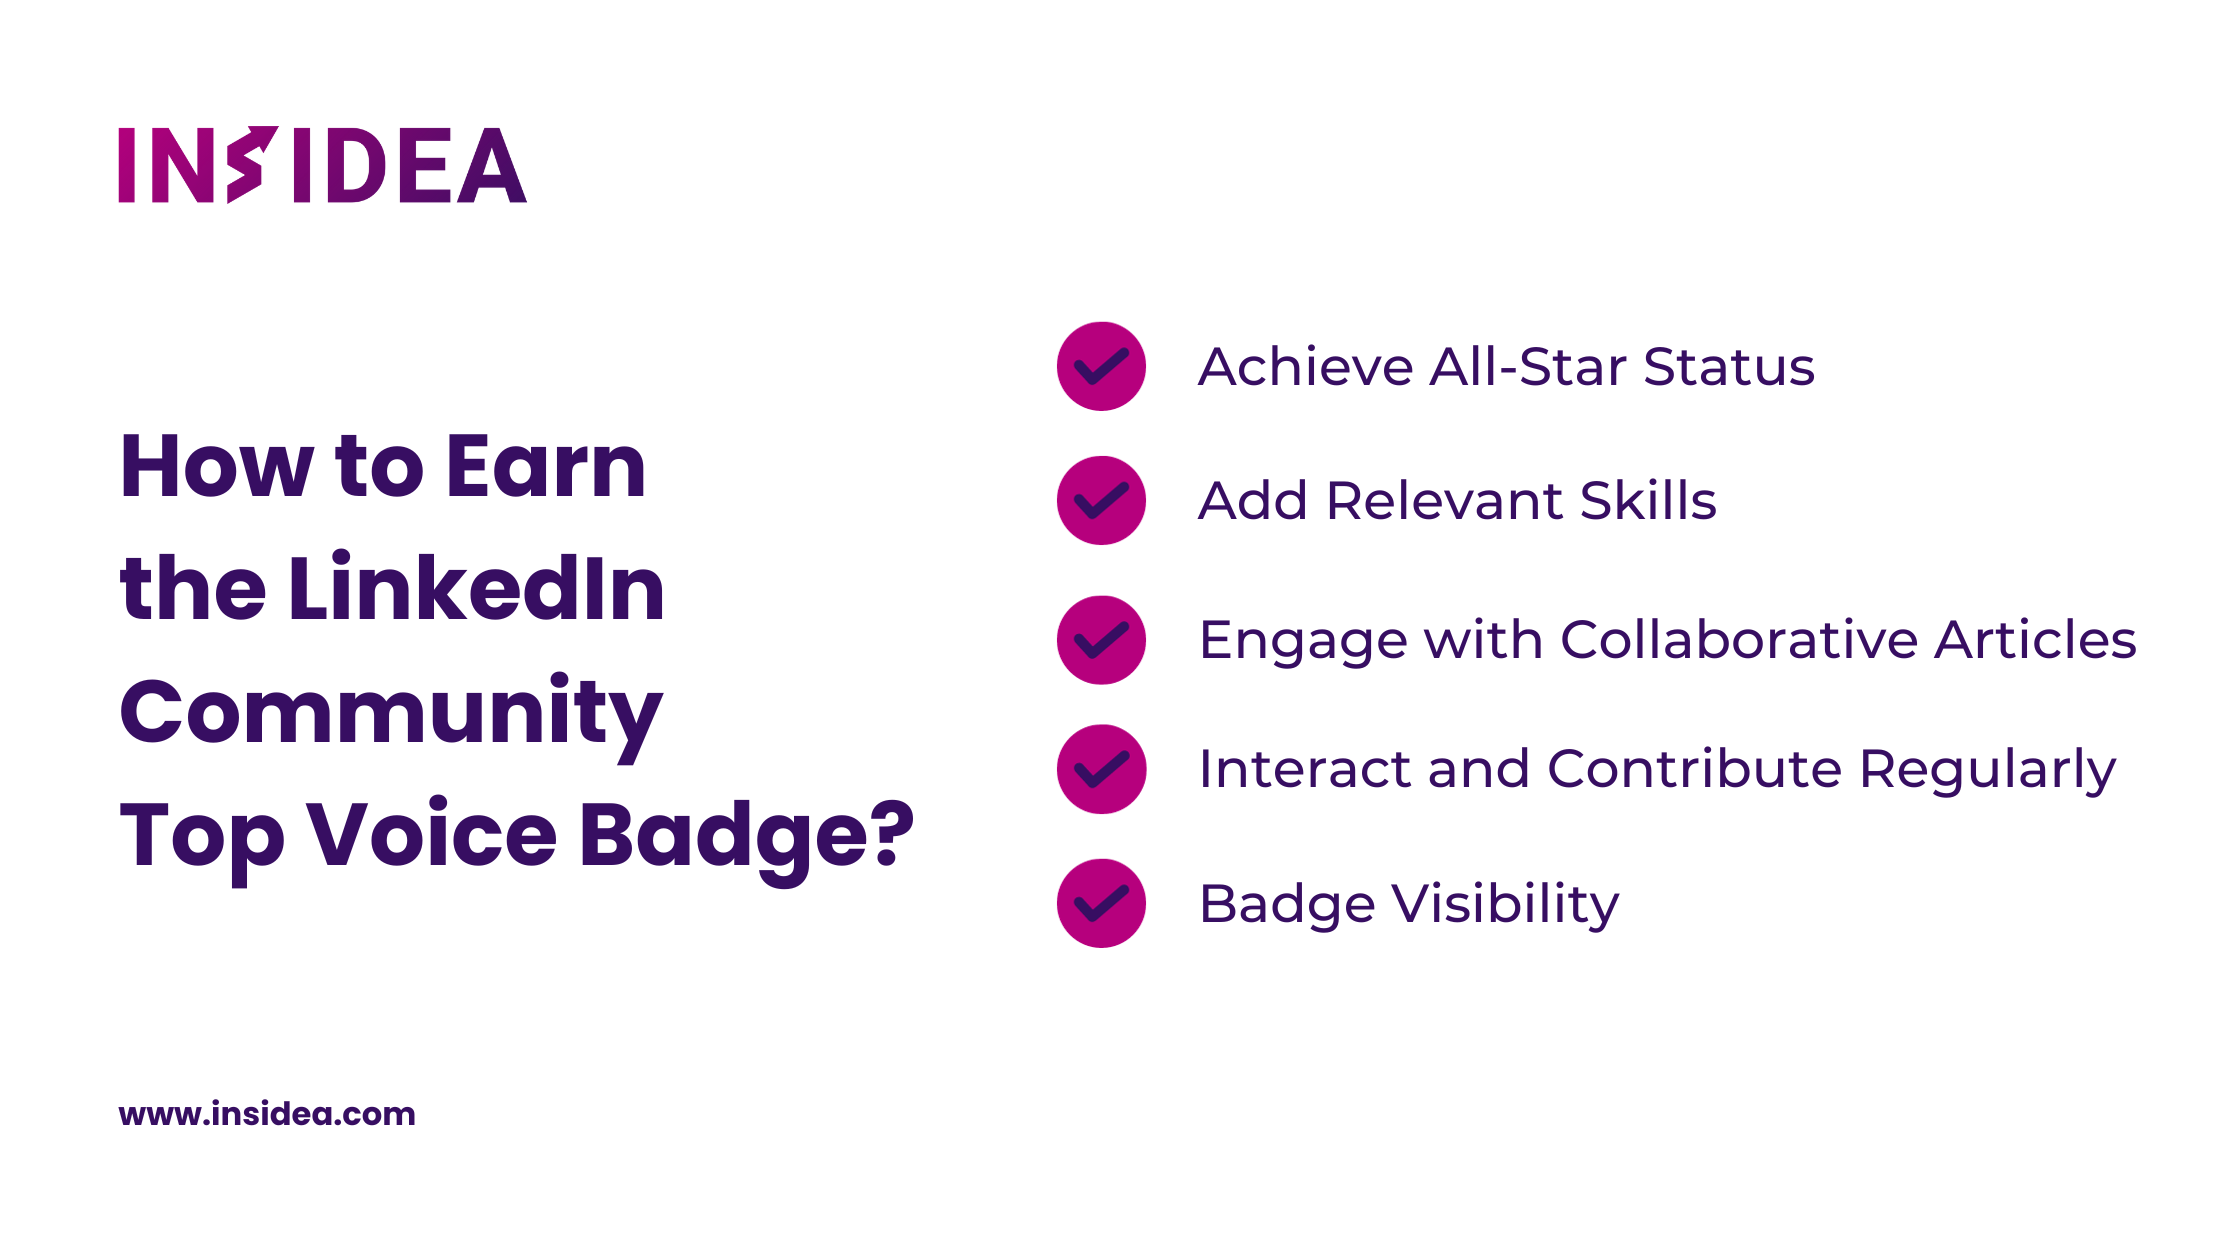 How to Earn the LinkedIn Community Top Voice Badge